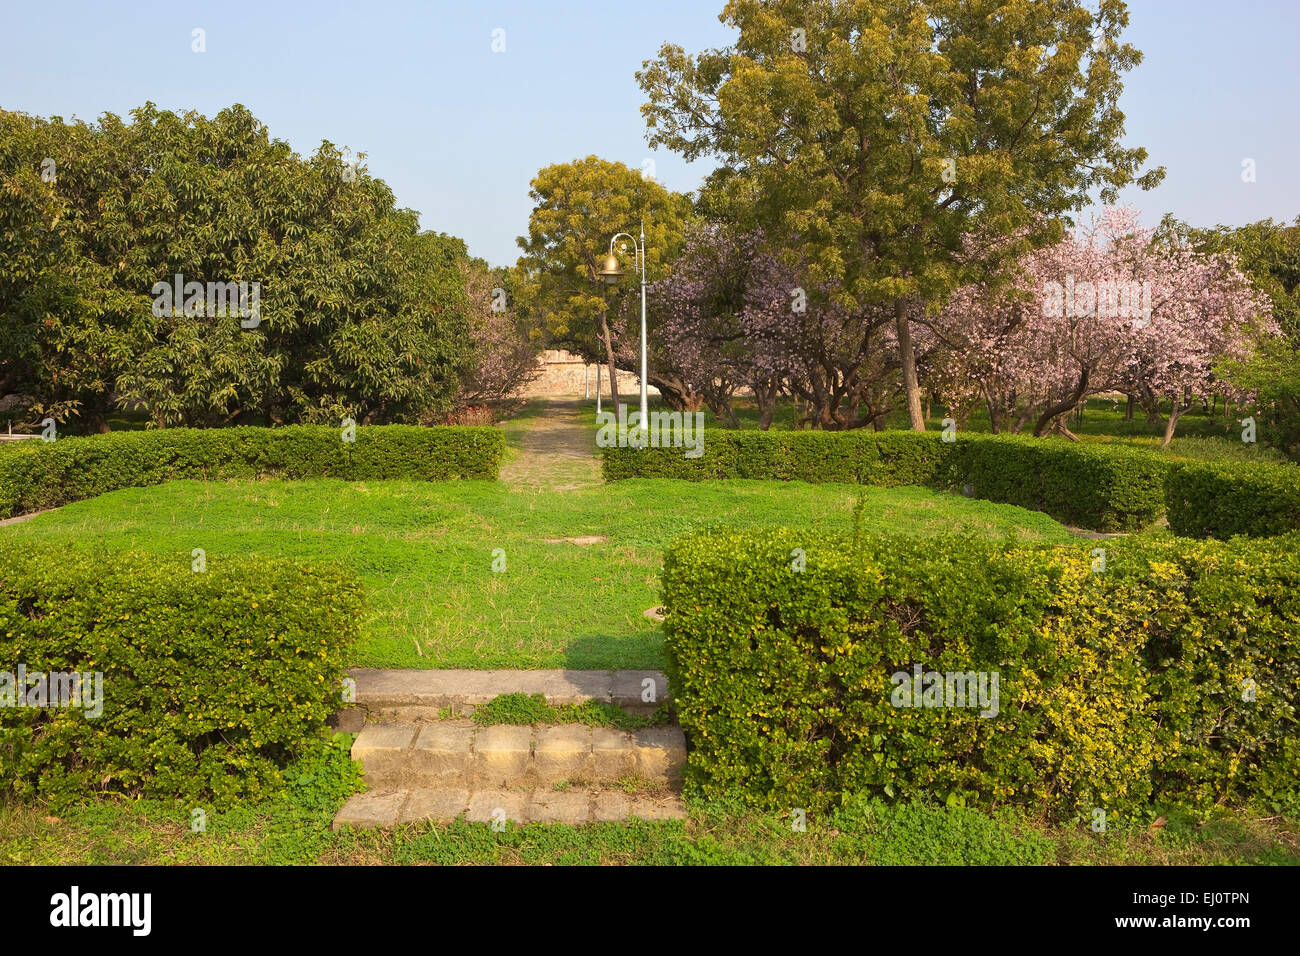 Ornamental gardens with flowering cherry trees and mango trees with lawns and clipped hedges at Pinjore gardens, Haryana, India Stock Photo